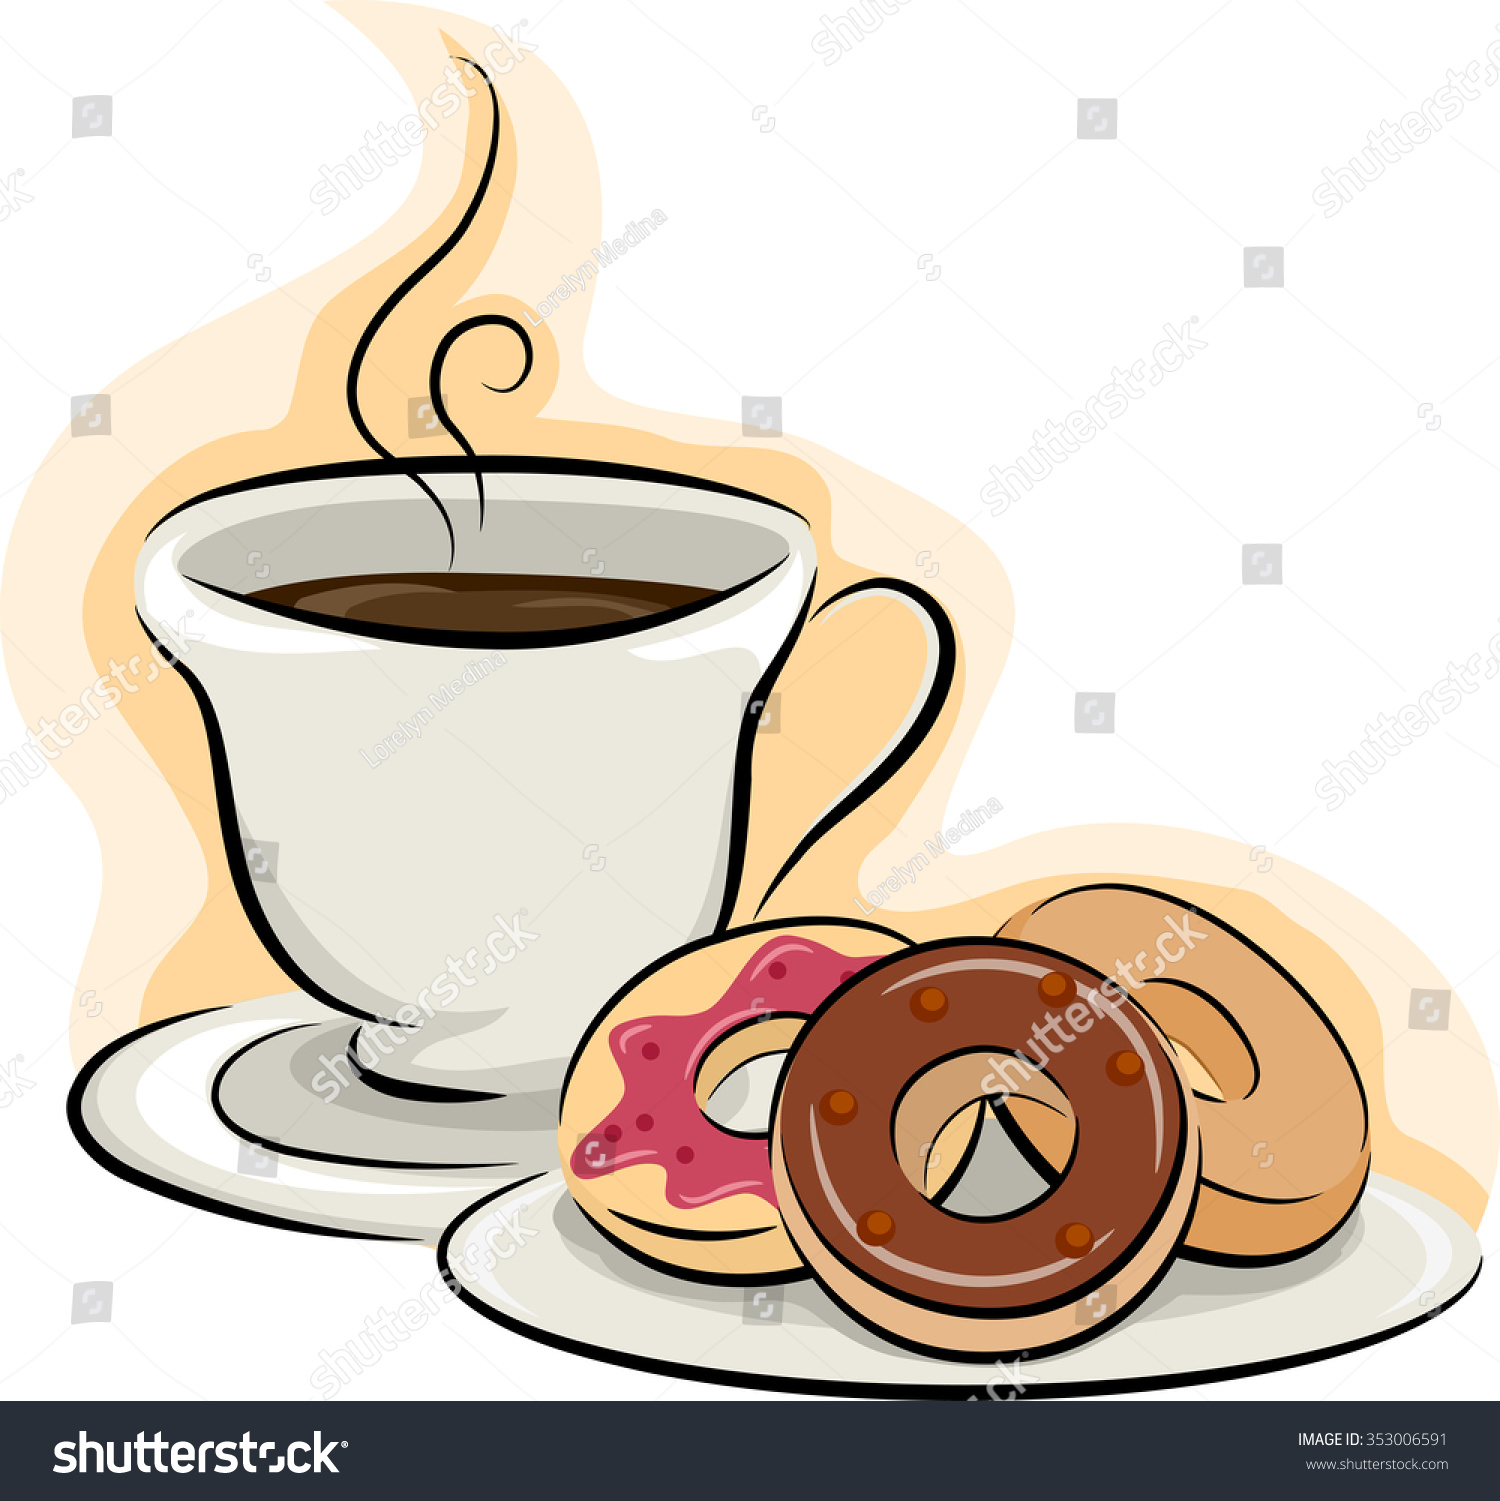 coffee and donuts clipart - photo #15